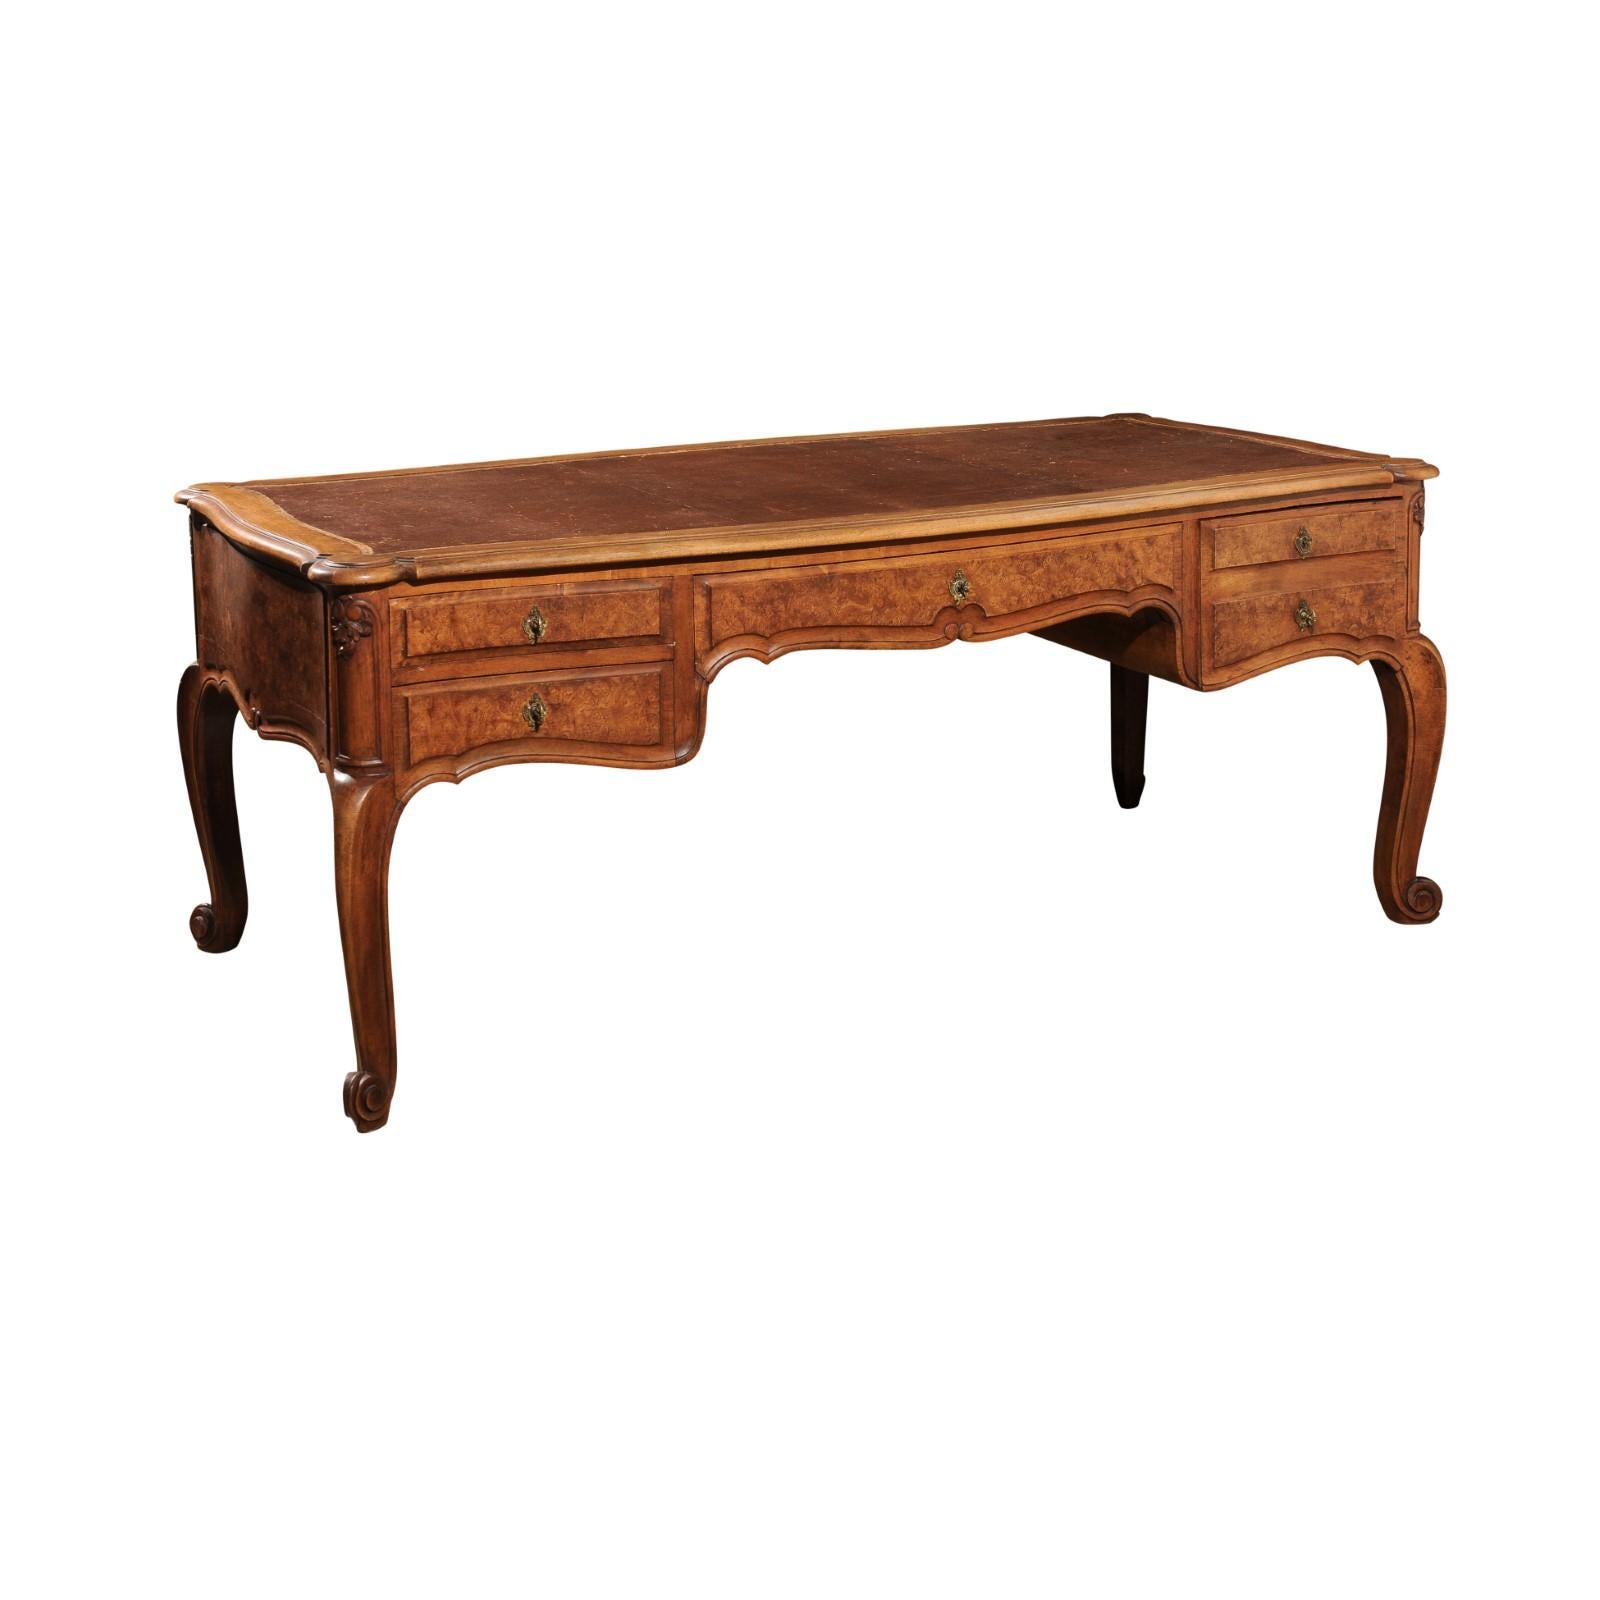 A Southern French Louis XV style 19th century burr walnut four-drawer desk from Avignon with leather top, foliage-carved décor and cabriole legs. Discover the grandeur and exquisite craftsmanship of this Southern French Louis XV style desk from the